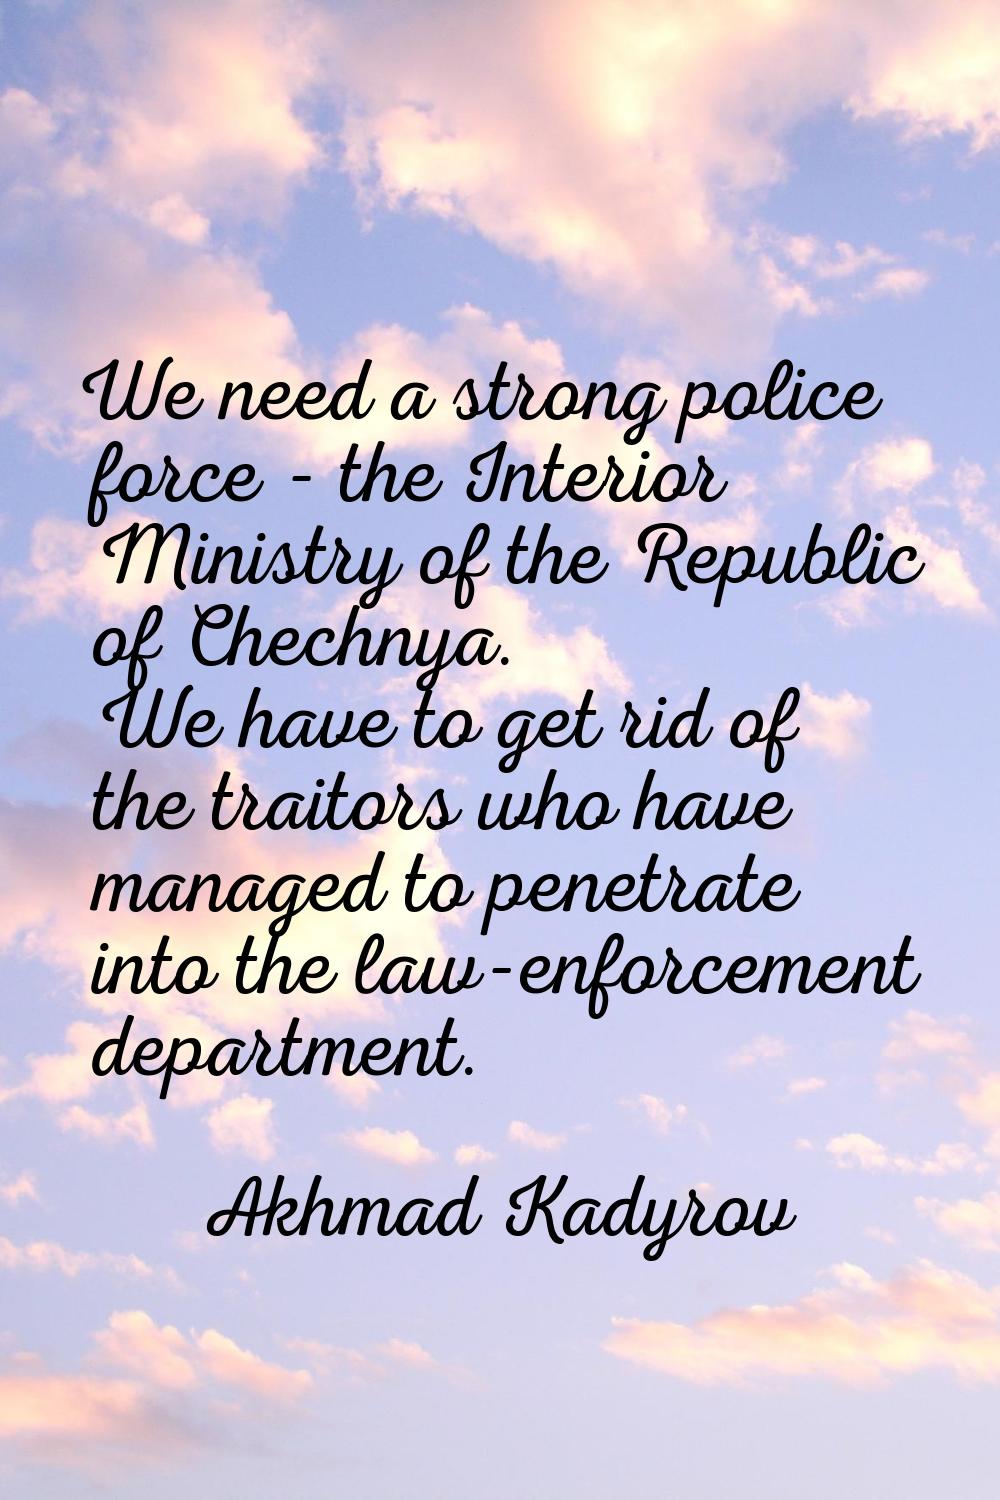 We need a strong police force - the Interior Ministry of the Republic of Chechnya. We have to get r